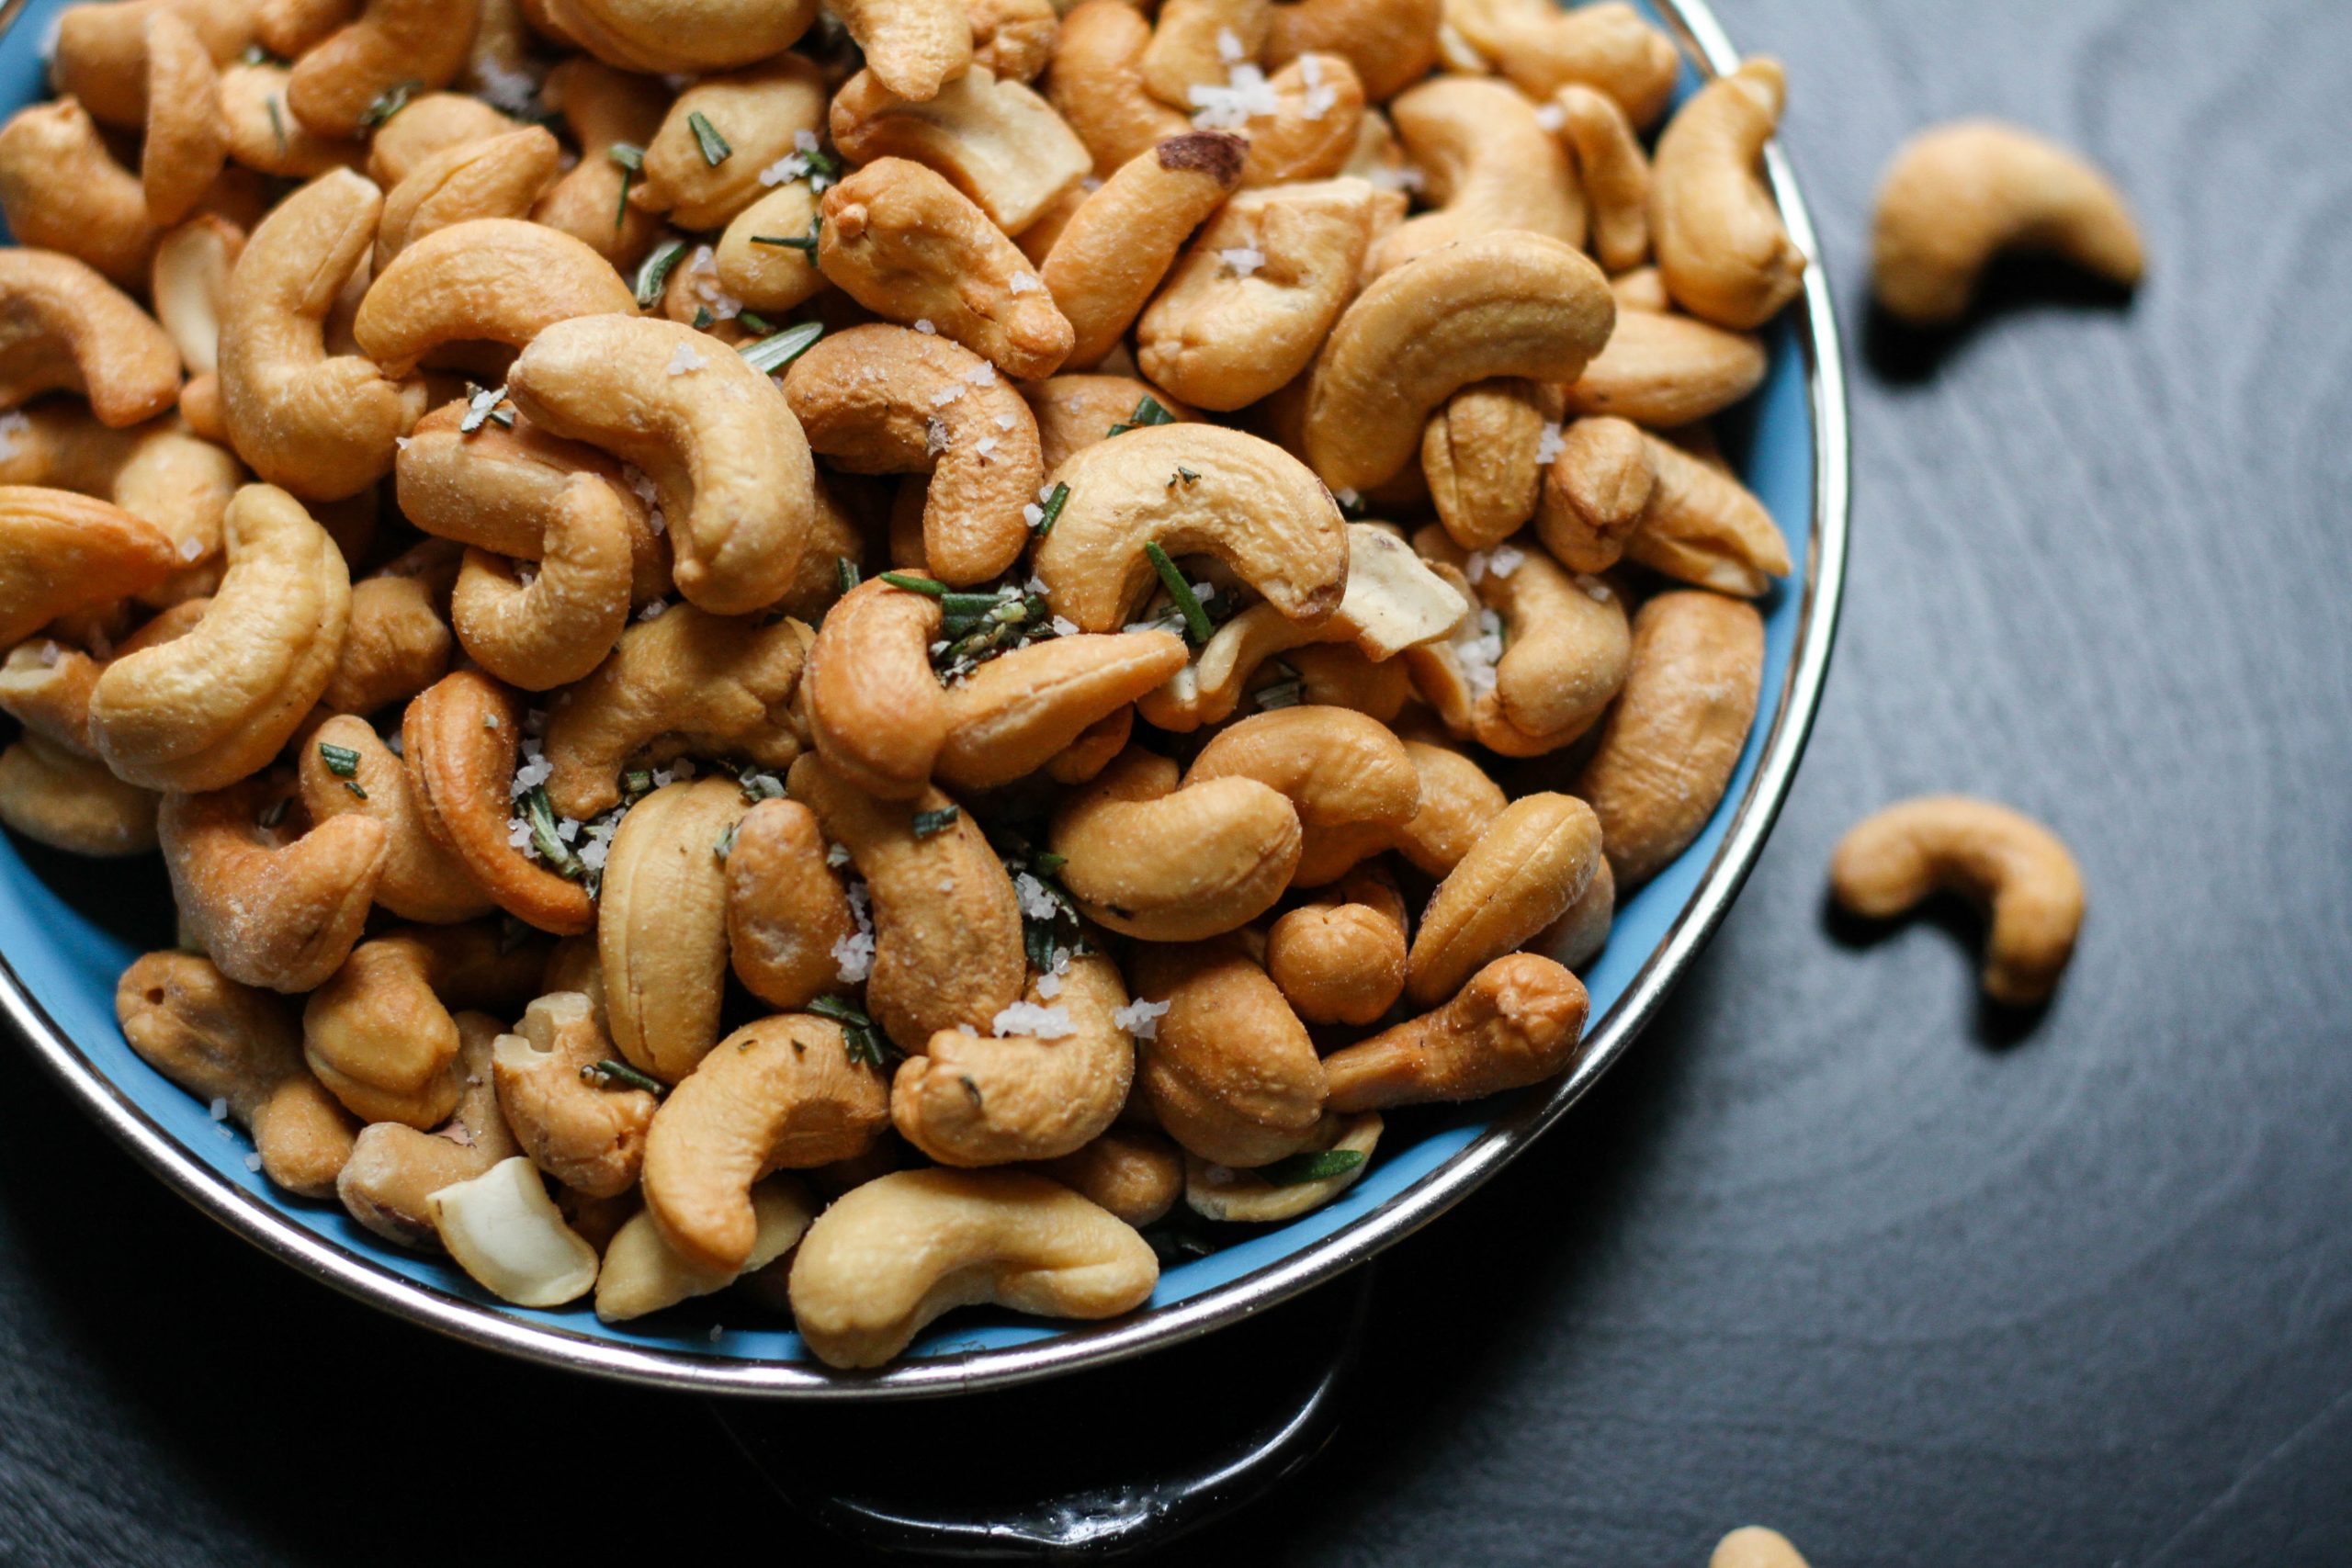 Bowl of cashews. Cashews are a great source of phosphorus